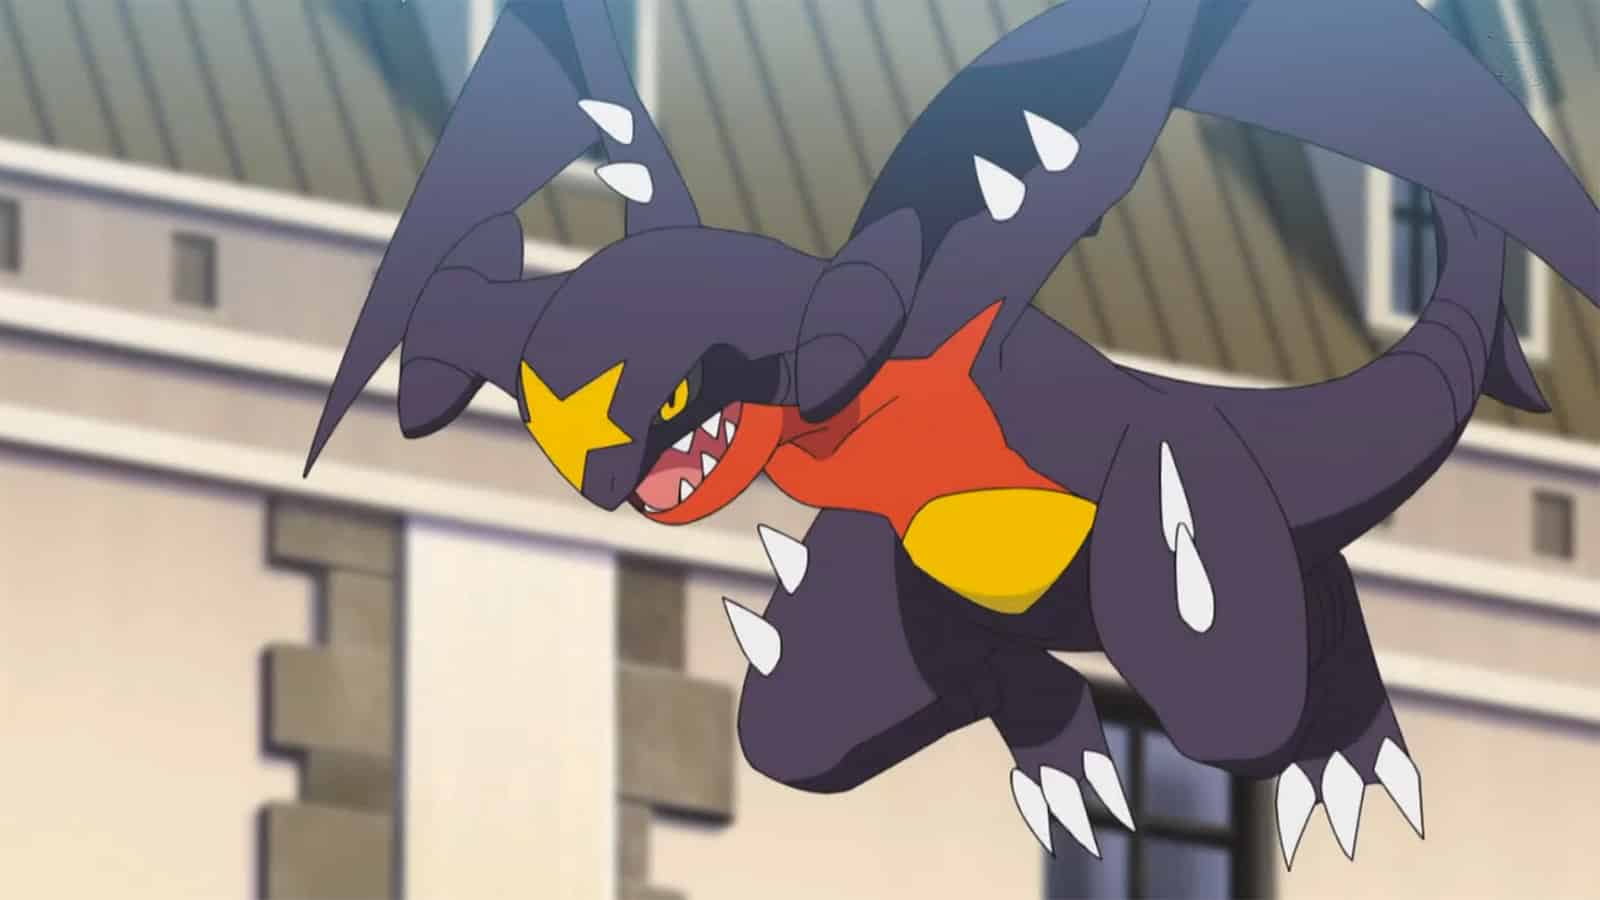 Garchomp in the anime